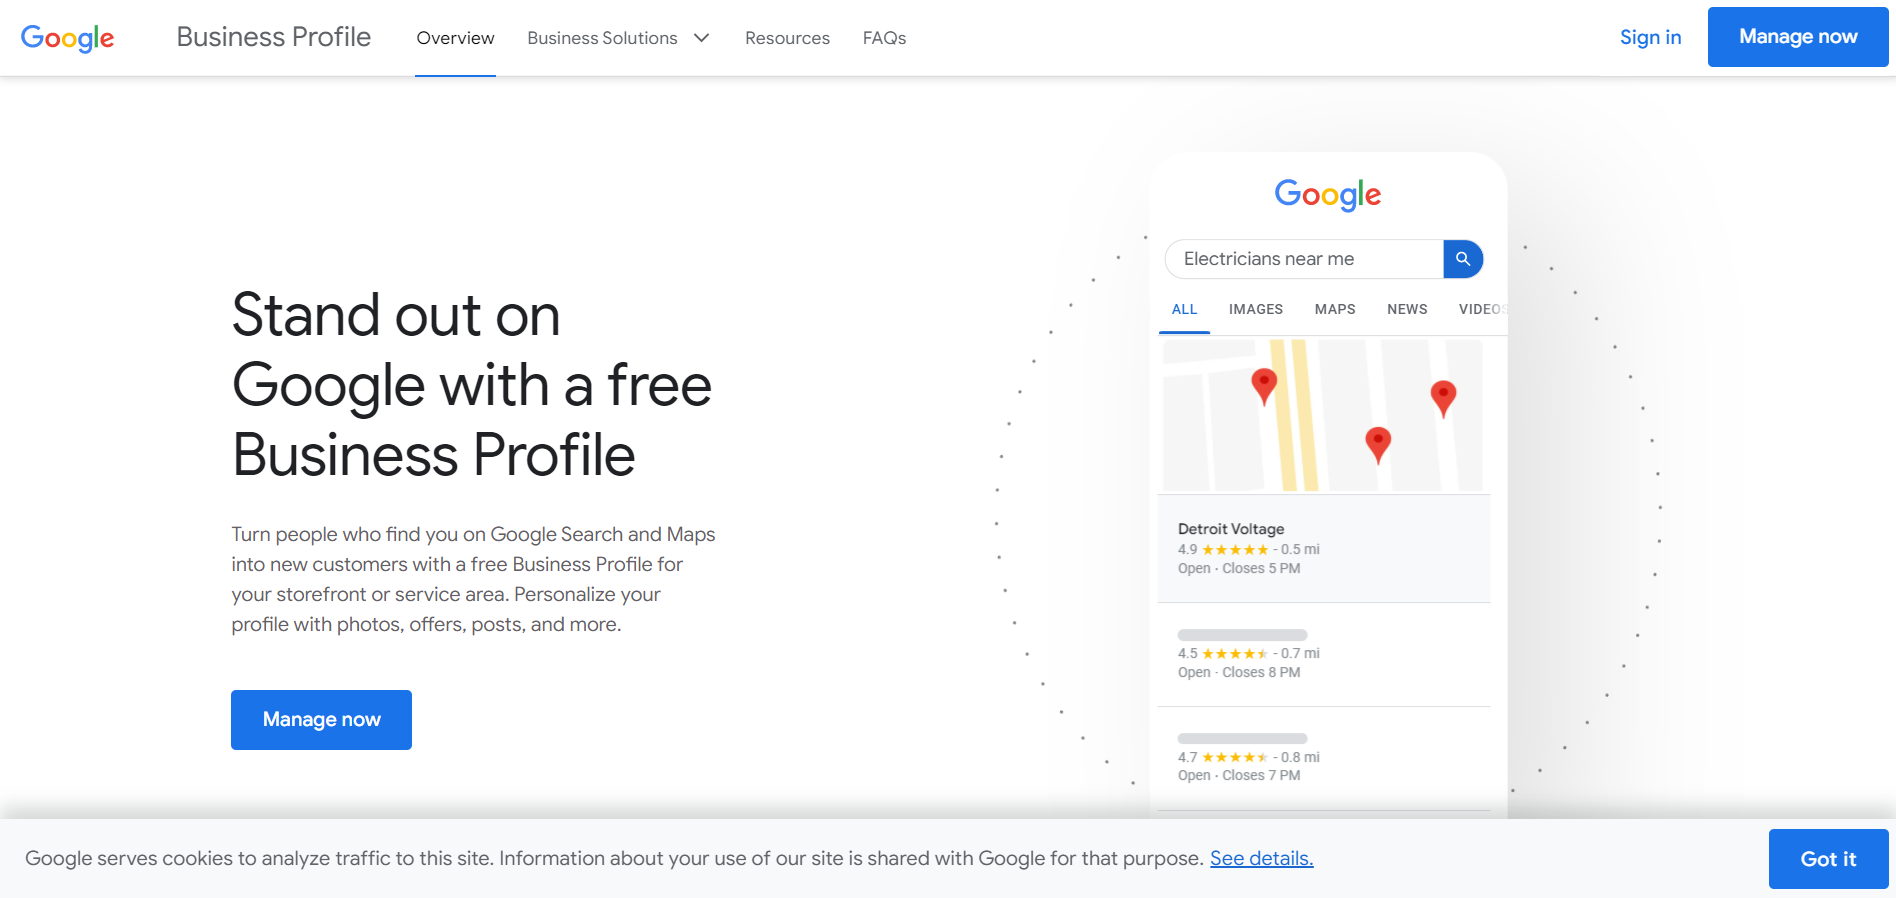 You can log into your Google Business Profile.